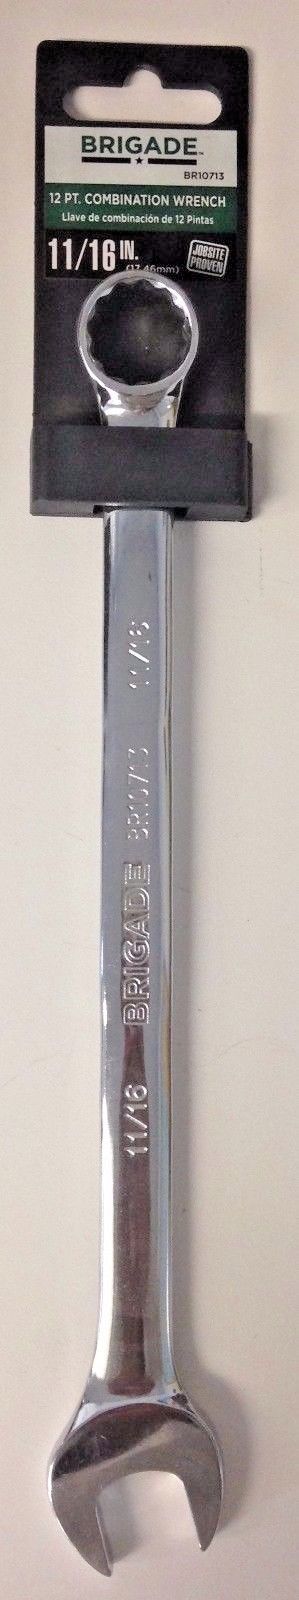 Brigade BR10713 11/16" Full Polish 12 Point Combination Wrench